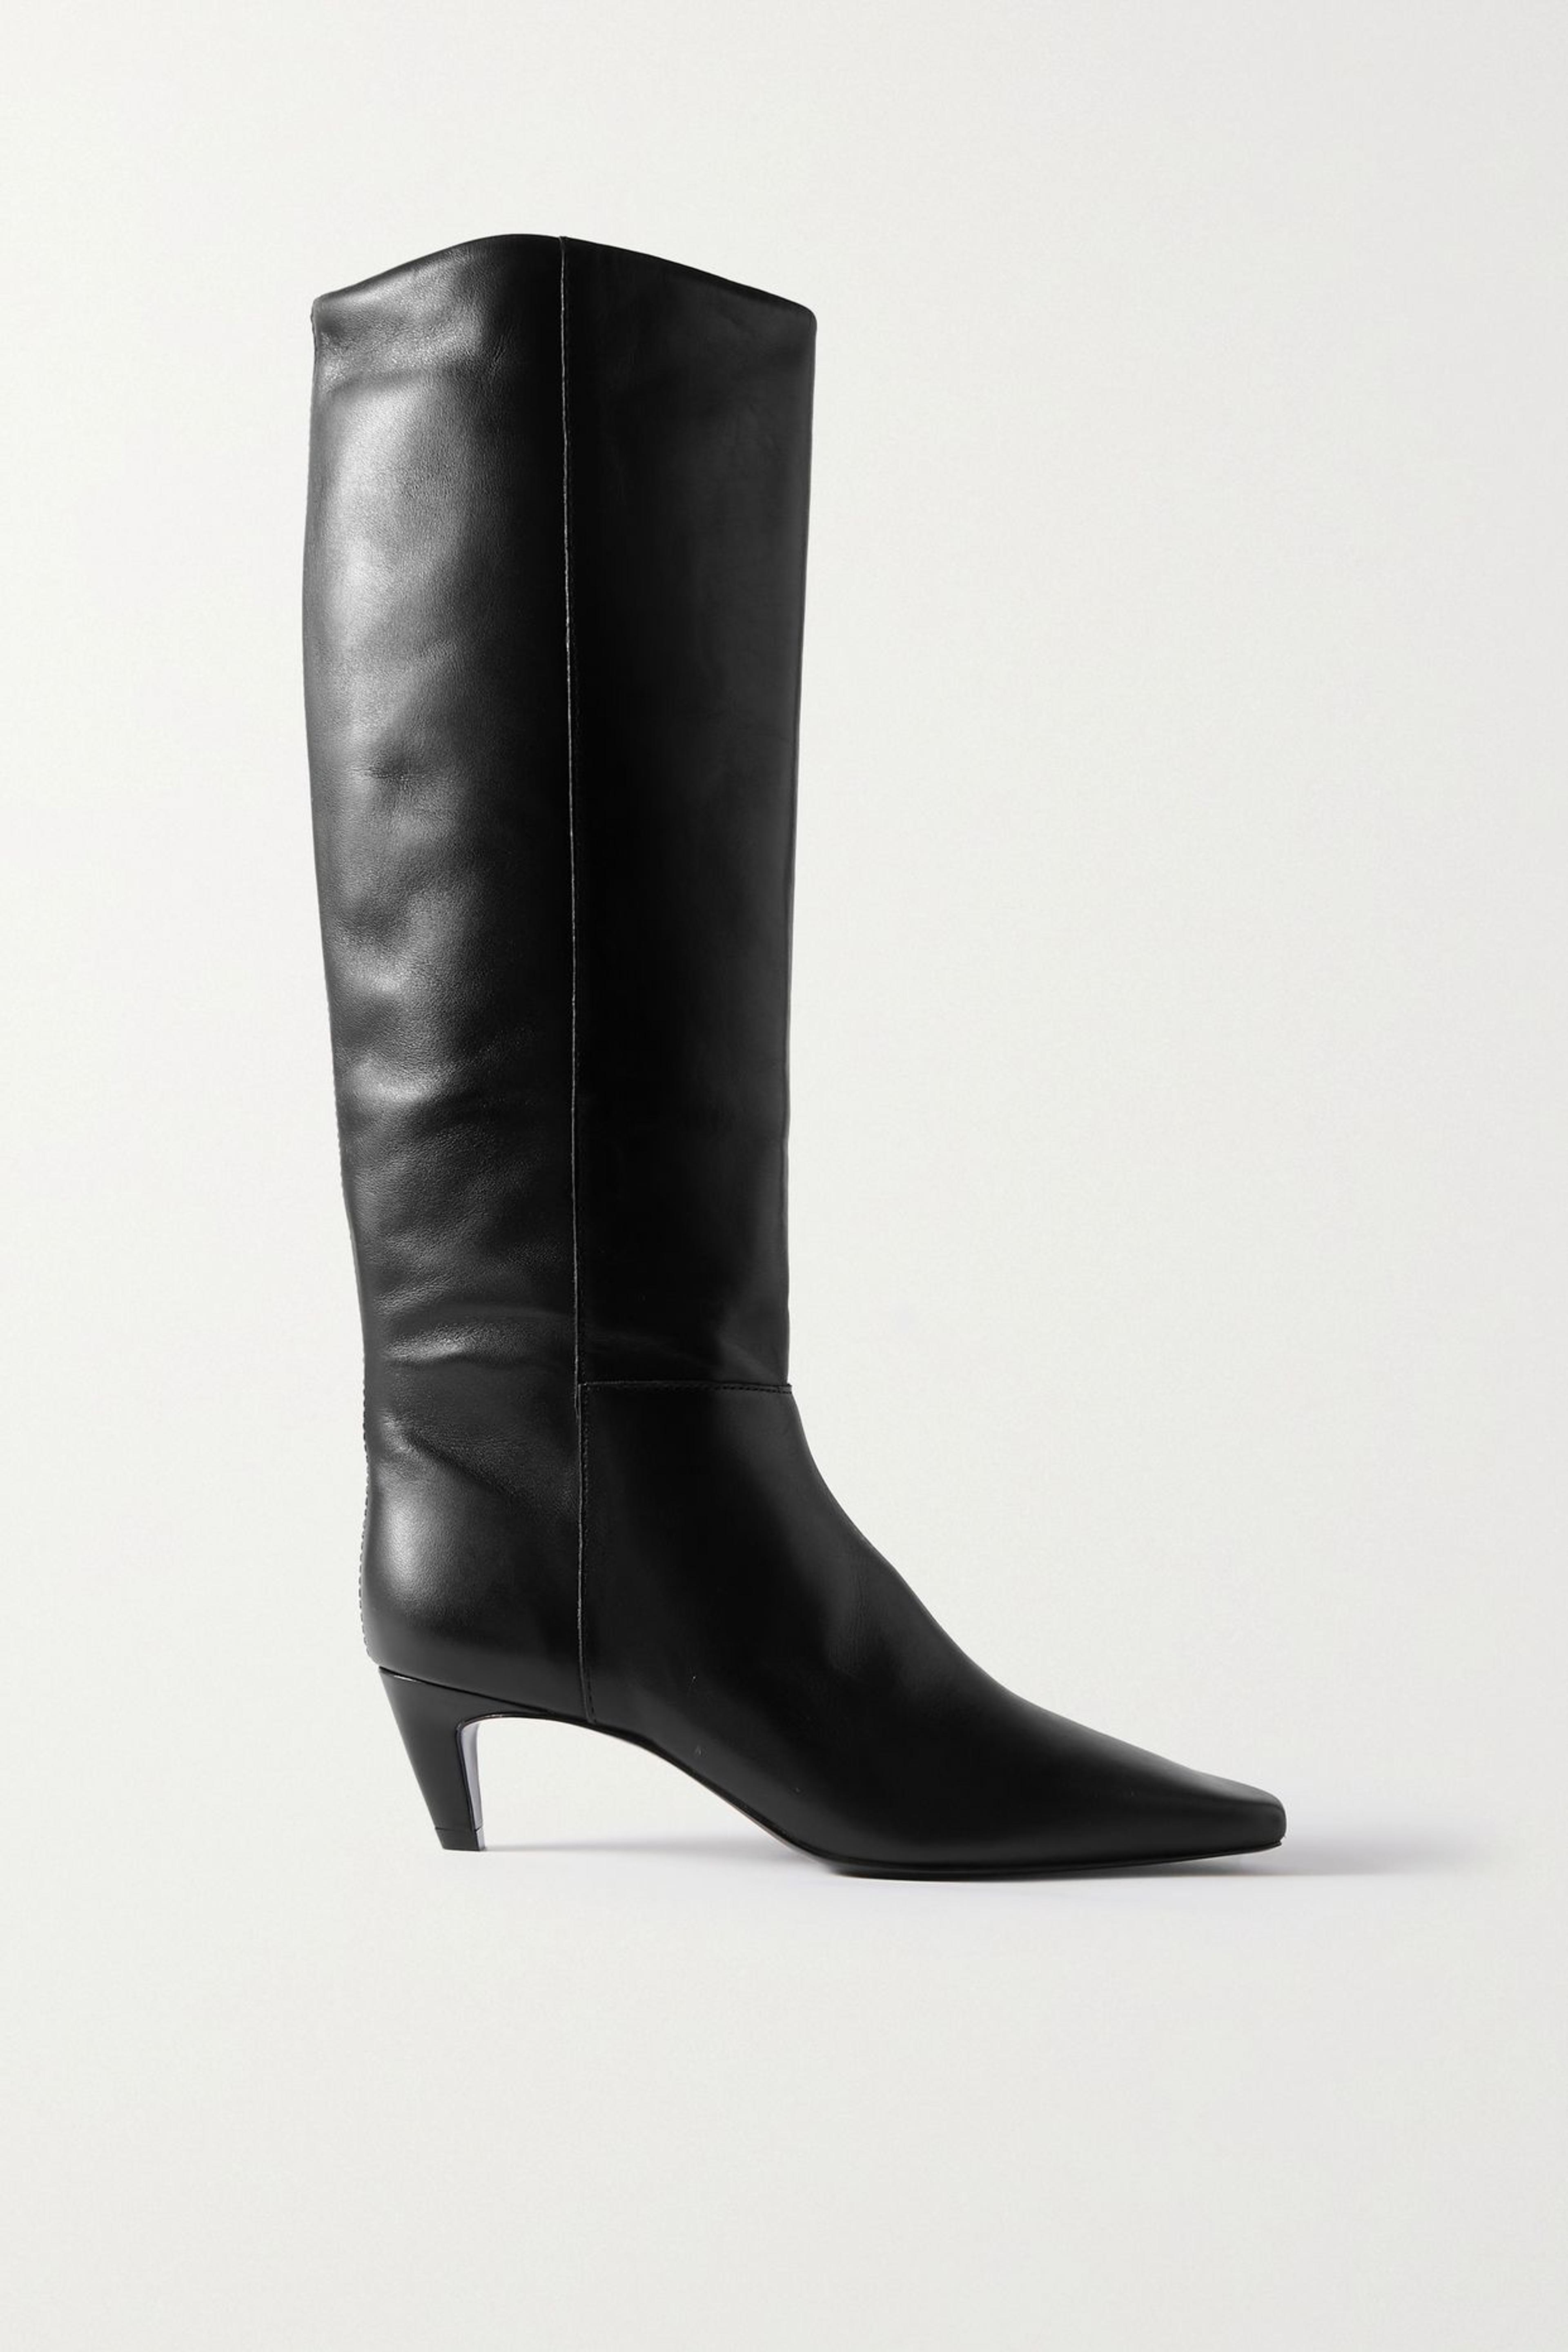 REFORMATION - Remy leather knee boots